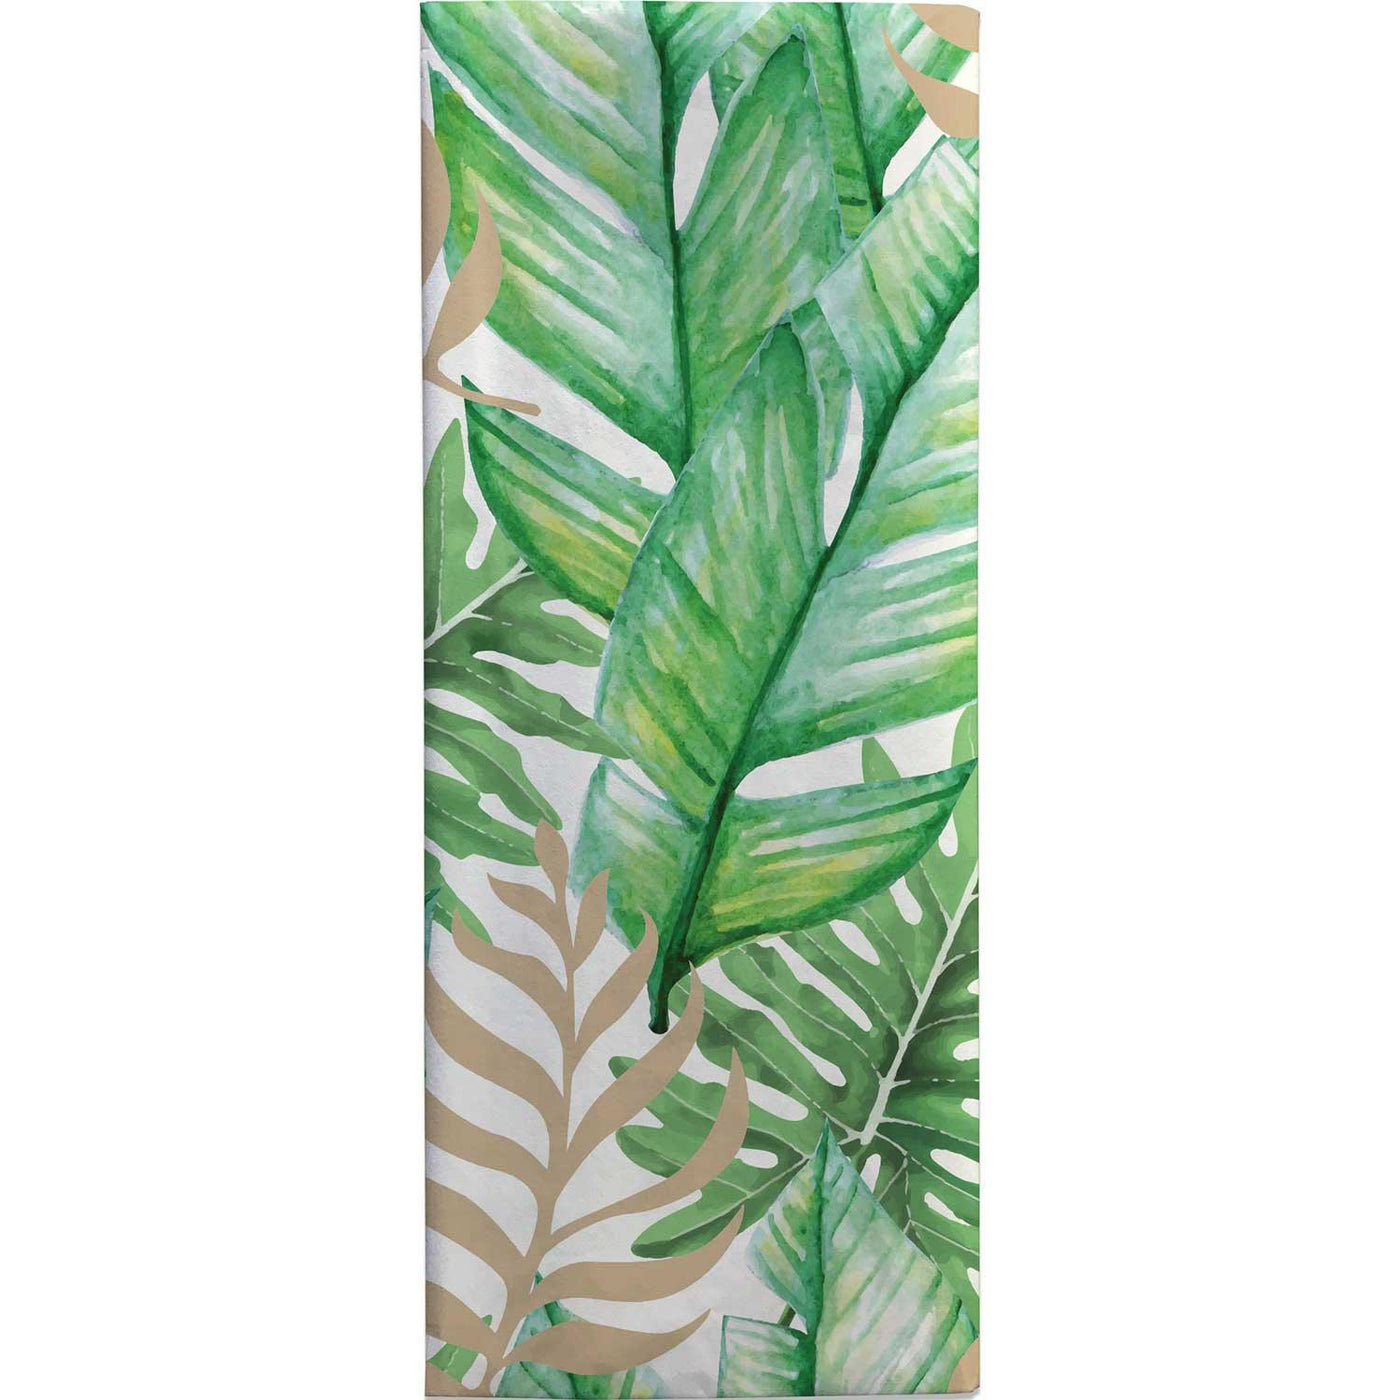 Tropic Thunder 20" x 30" Gift Tissue Paper by Present Paper - Vysn